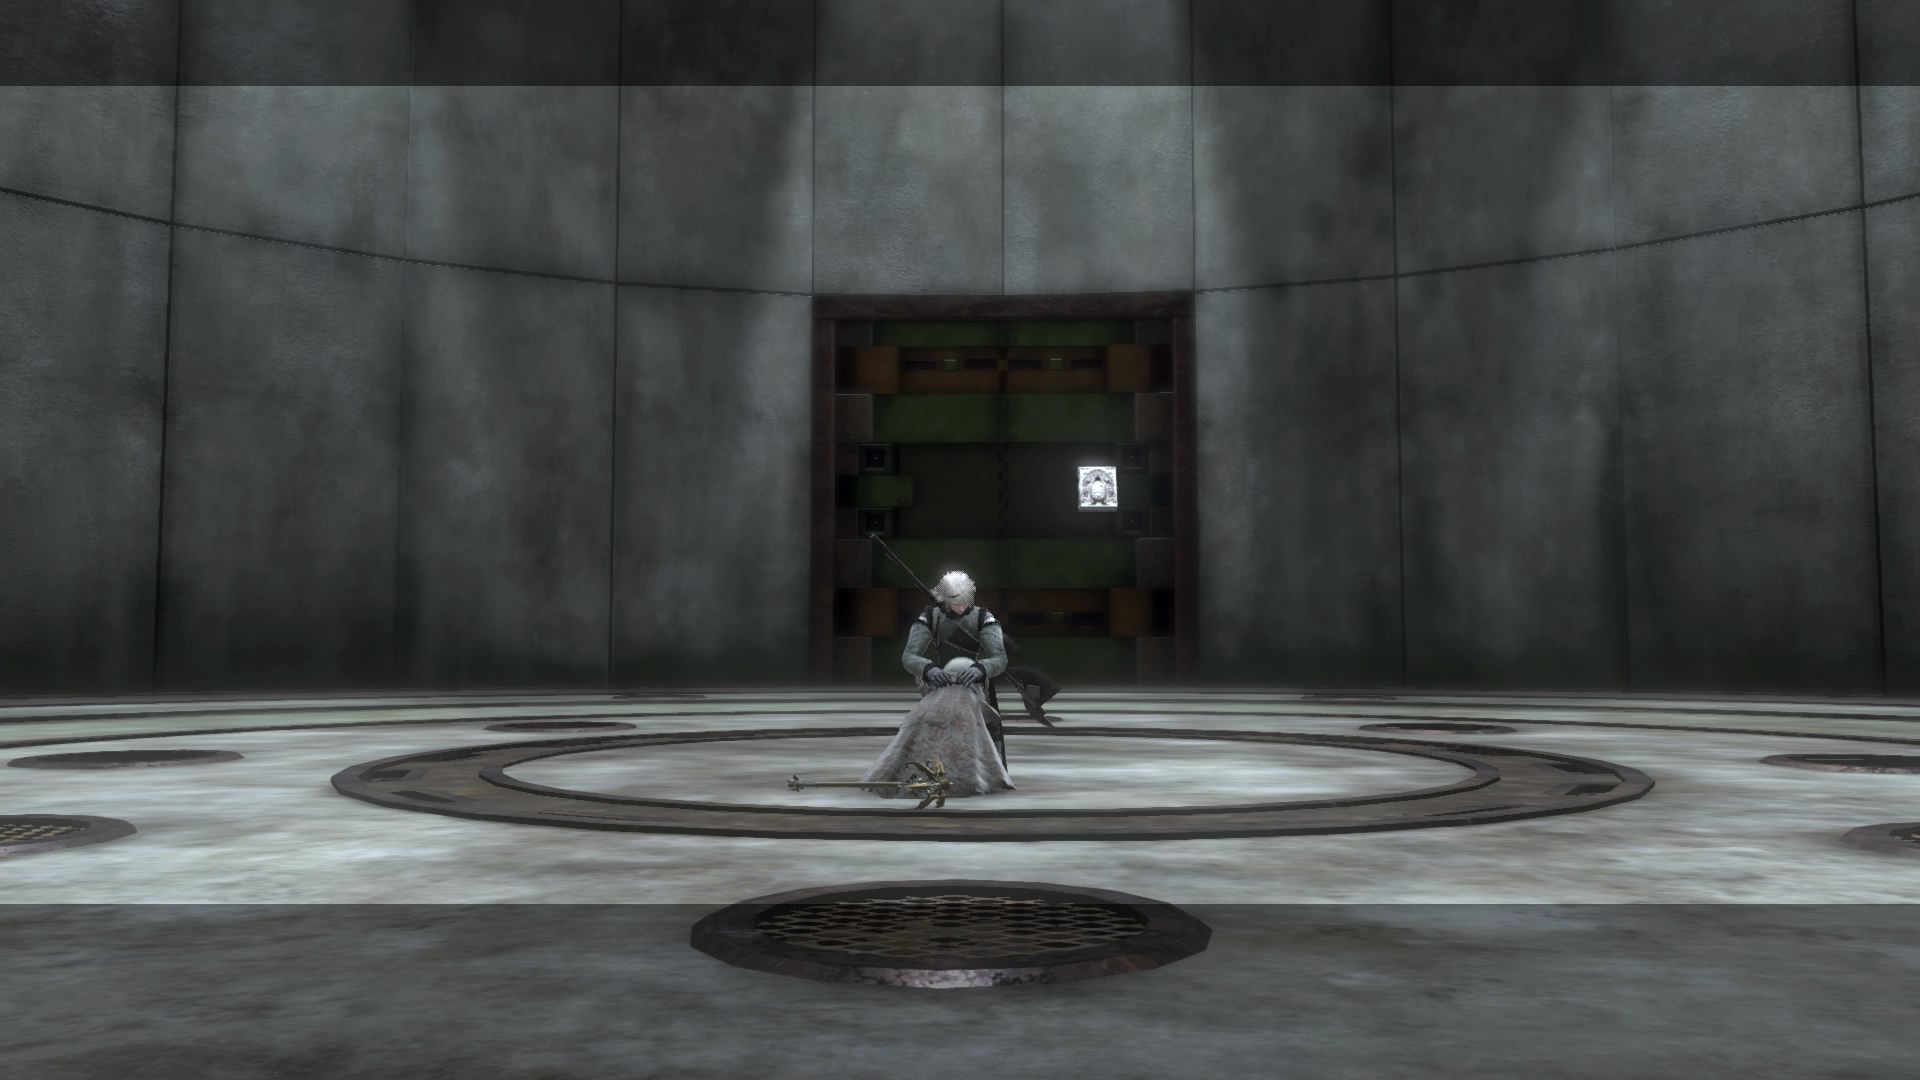 Emil kneeling in front of someone crying